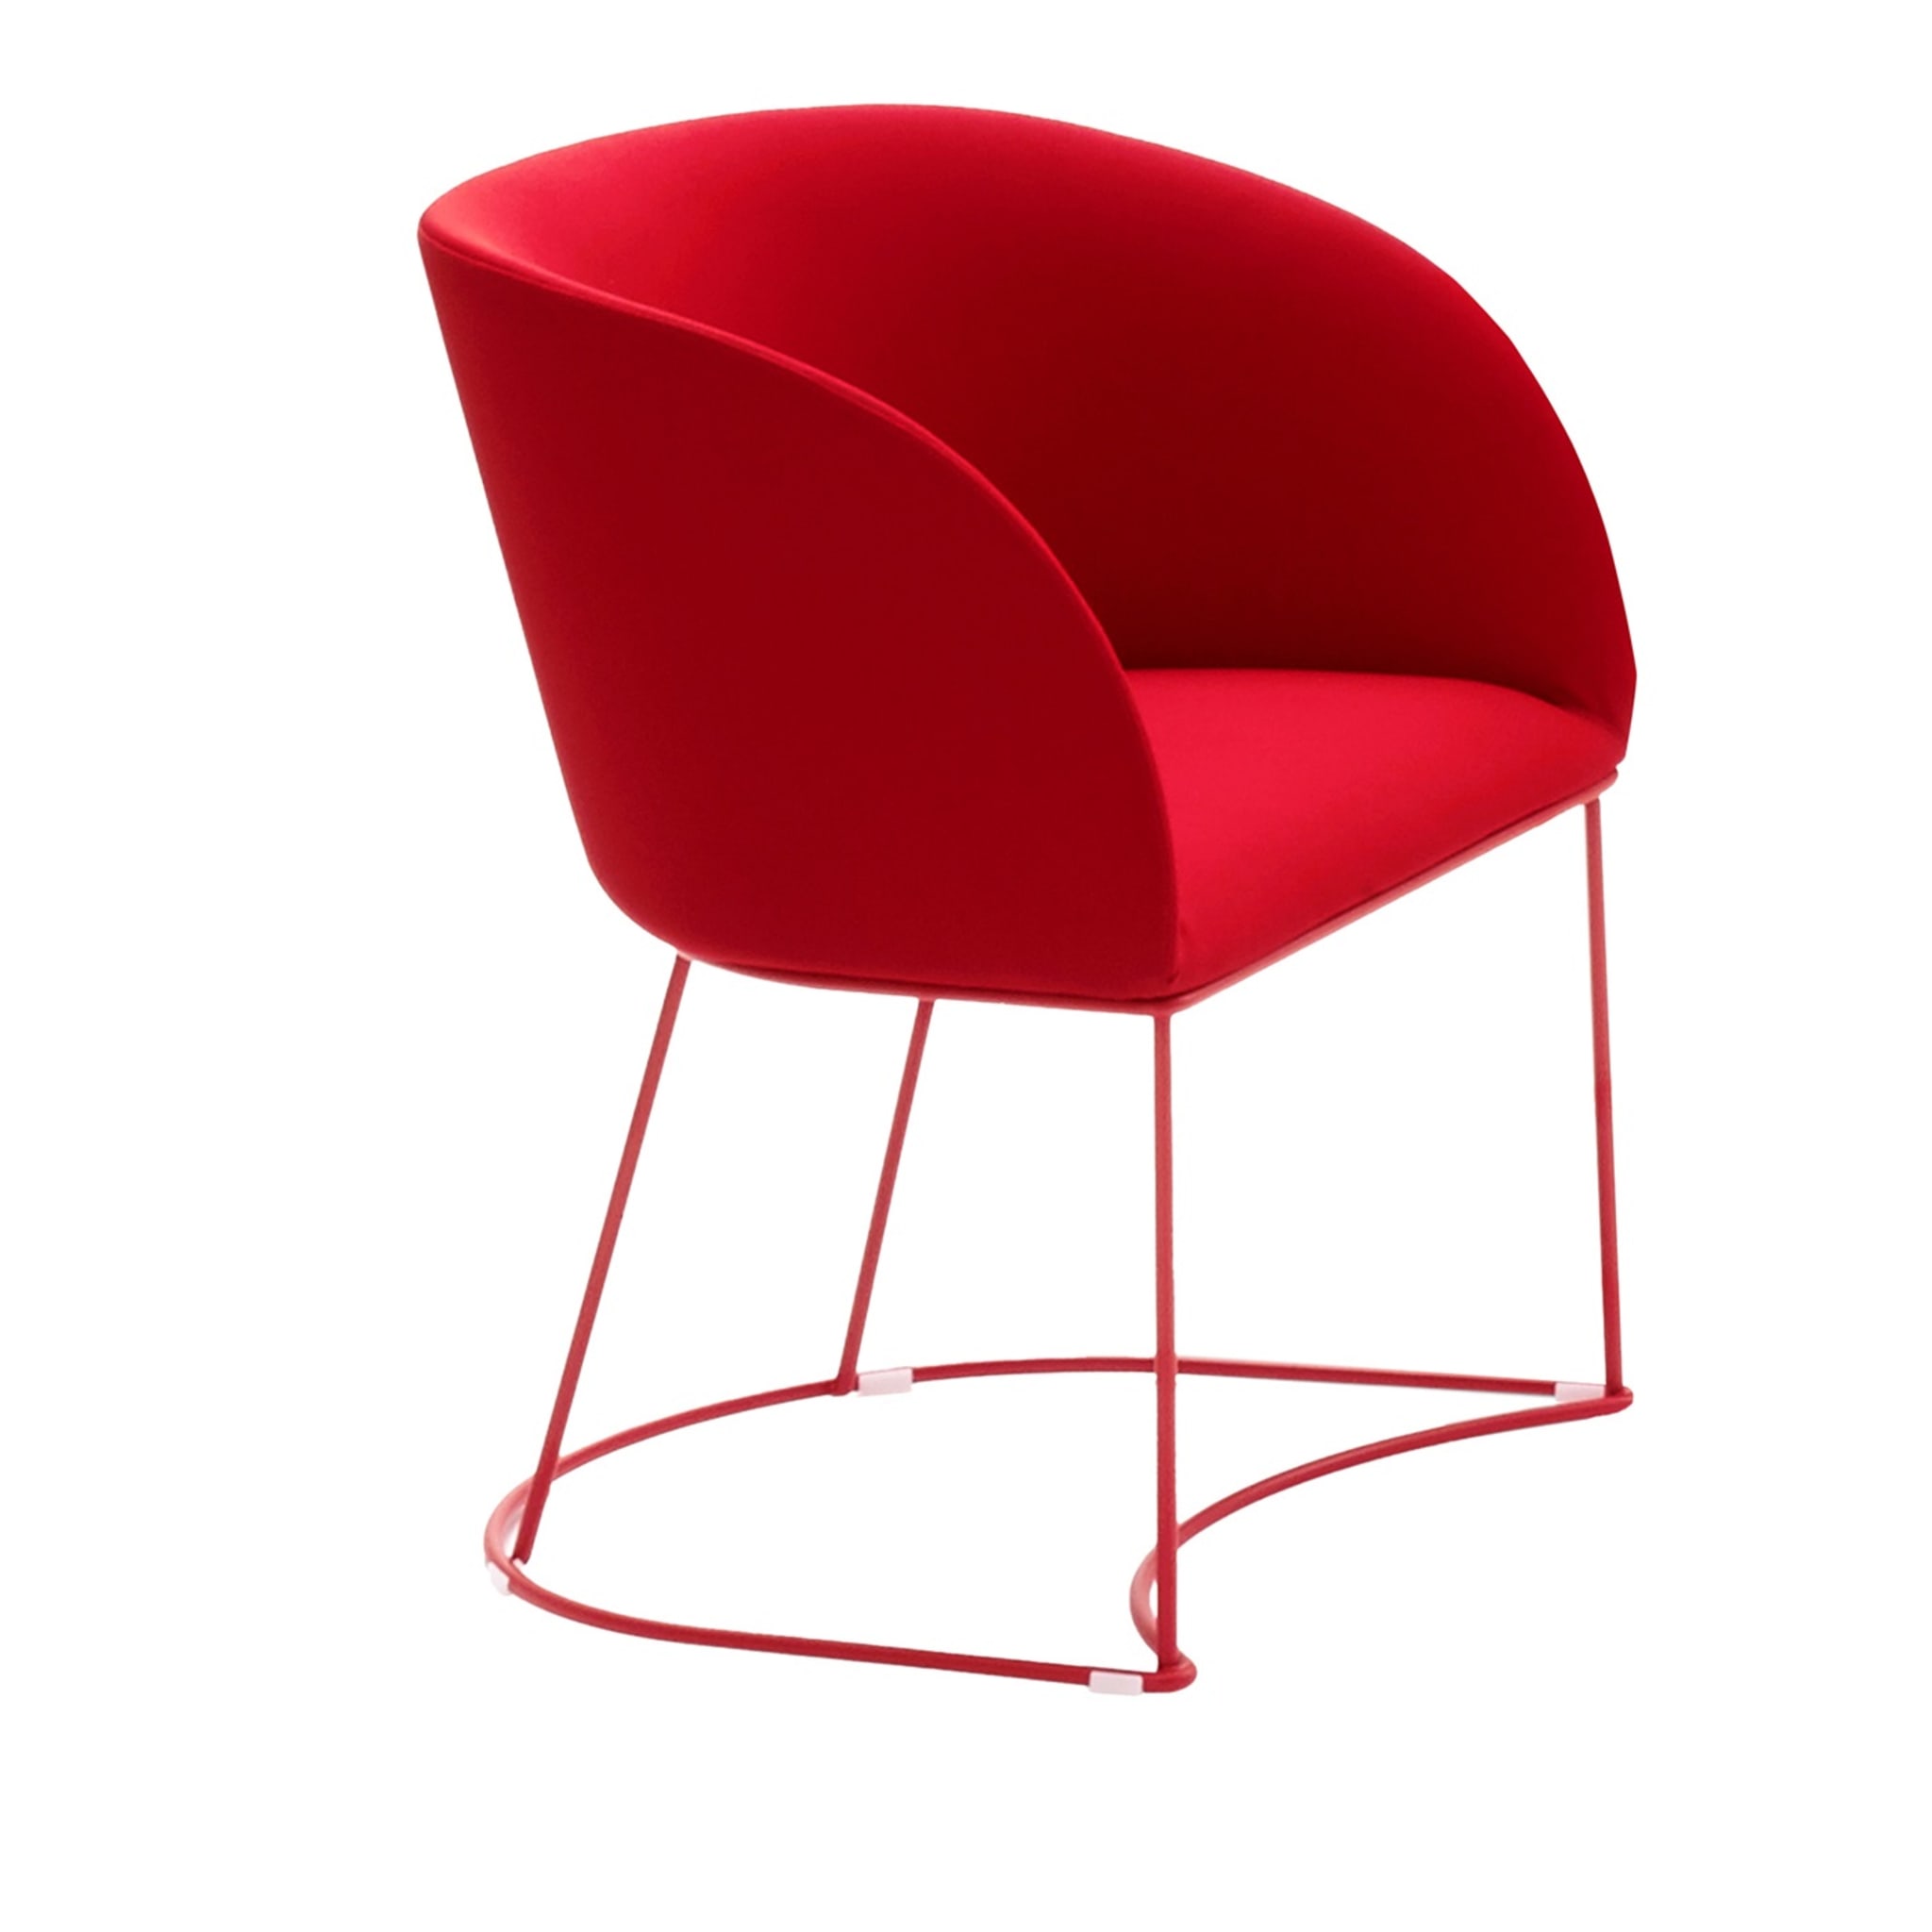 MILLY red VISITOR CHAIR #1 by Basaglia + Rota Nodari - Main view